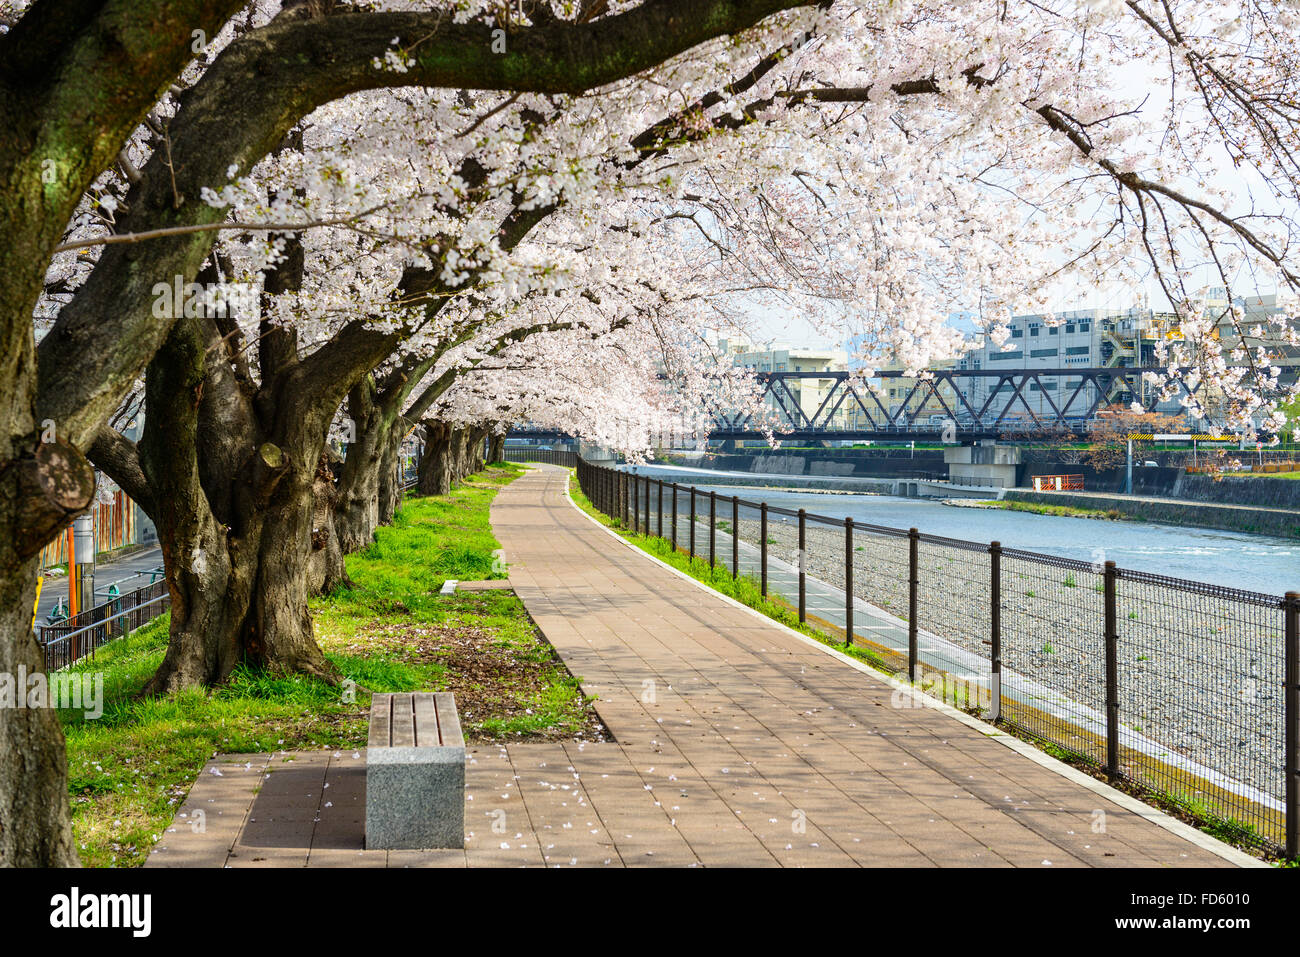 Cherry Blossoms blooming in Kyoto, Japan. Stock Photo